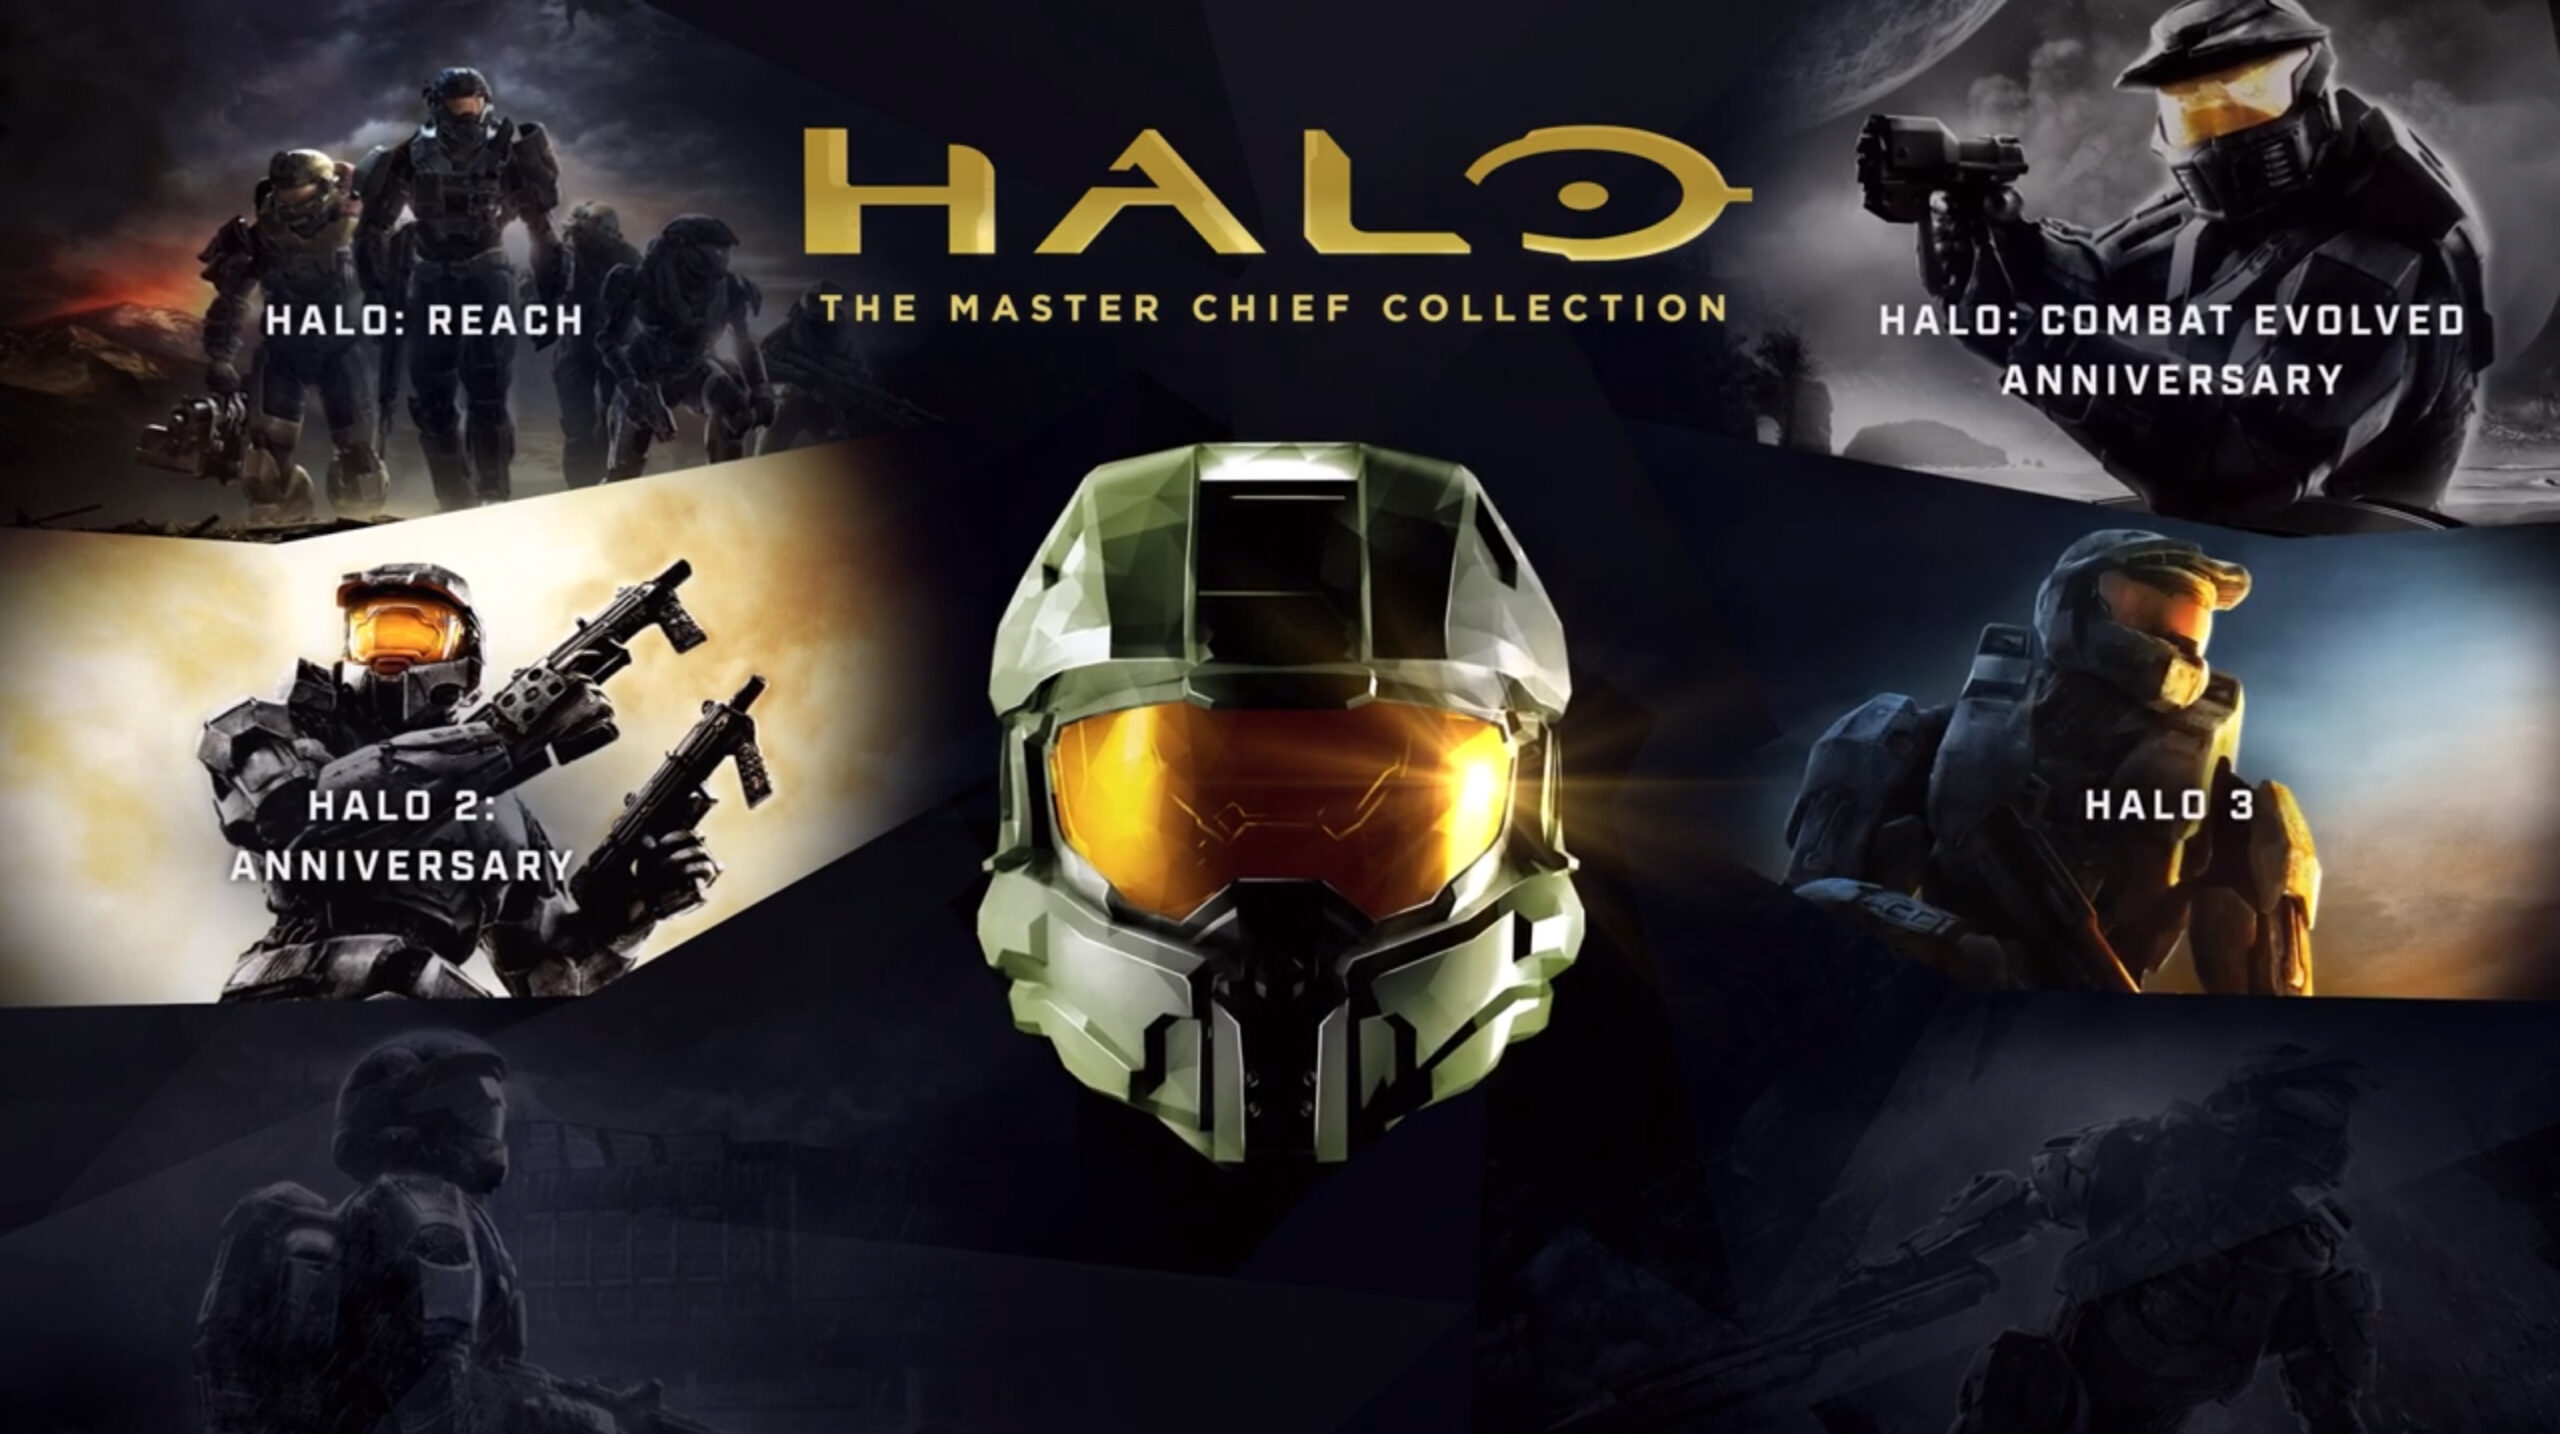 Halo 3 is coming to PC through The Master Chief Collection on July 14